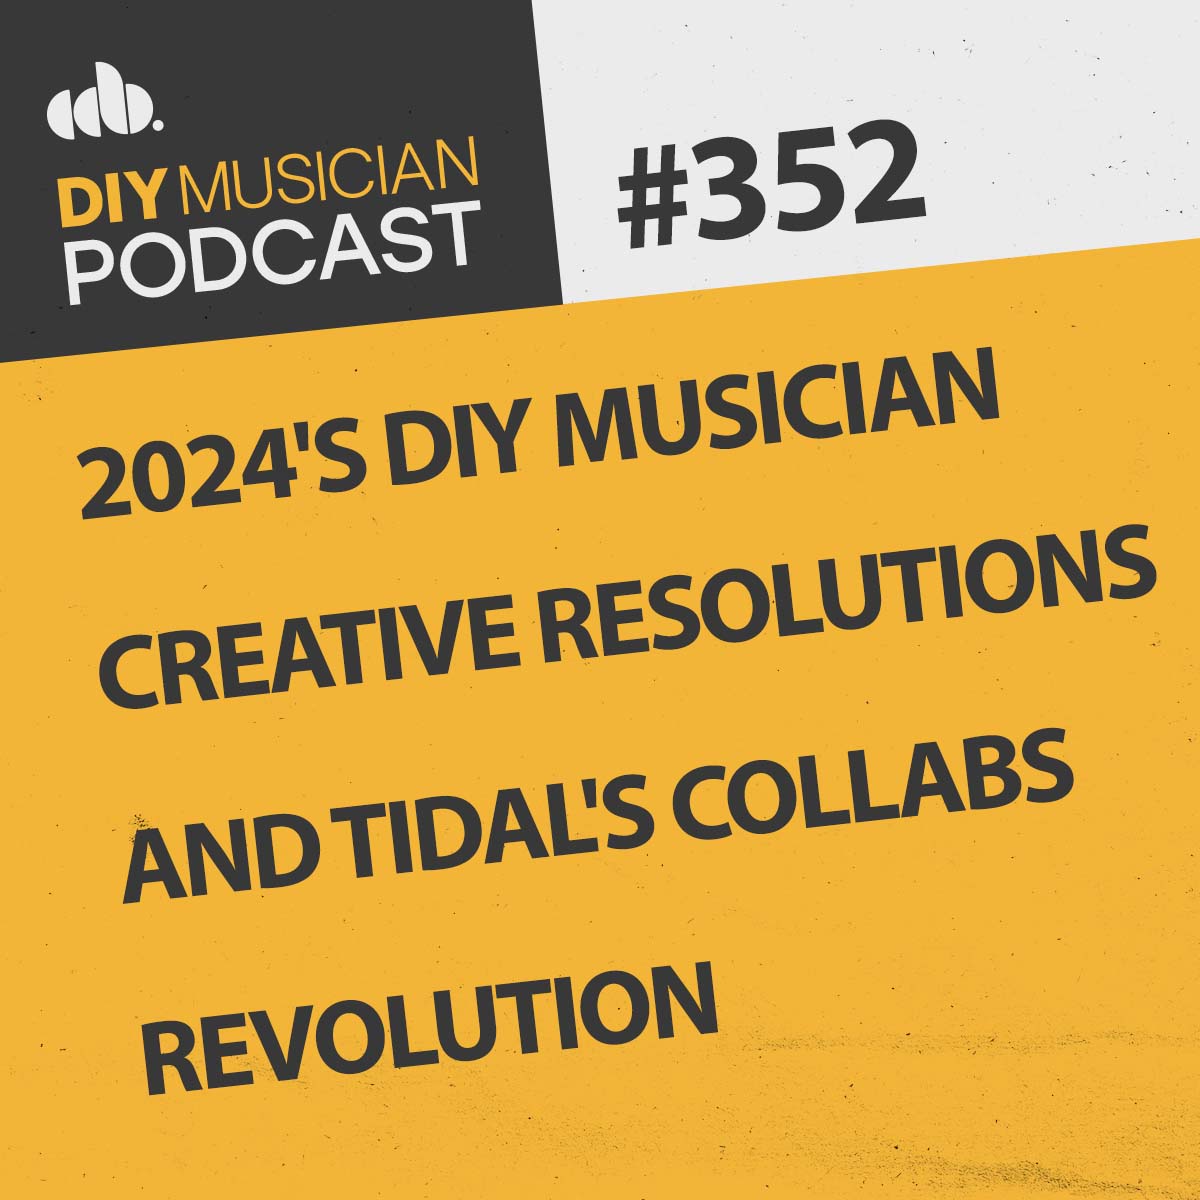 #352: 2024’s DIY Musician Creative Resolutions and Tidal’s Collabs Revolution thumbnail